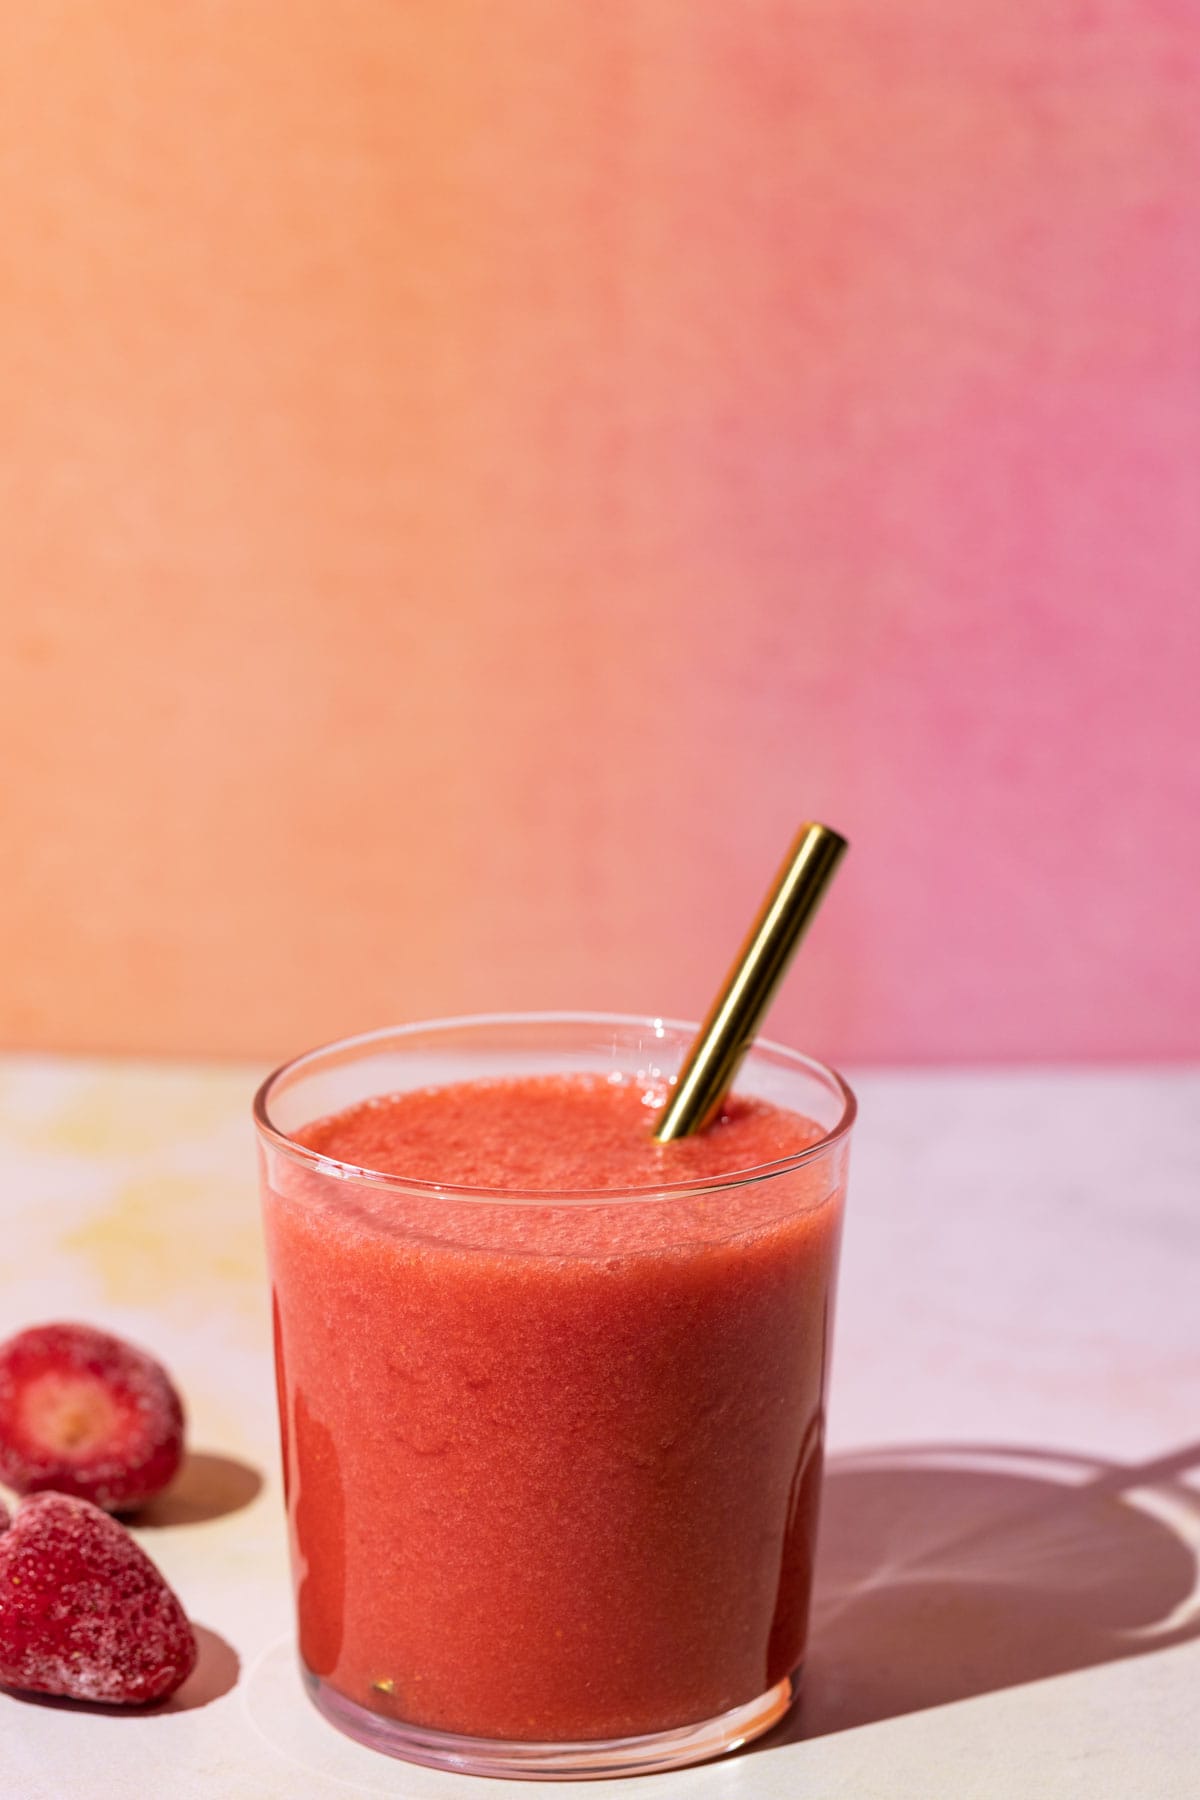 Strawberry lemonade smoothie with strawberries and a gold straw on a colorful background